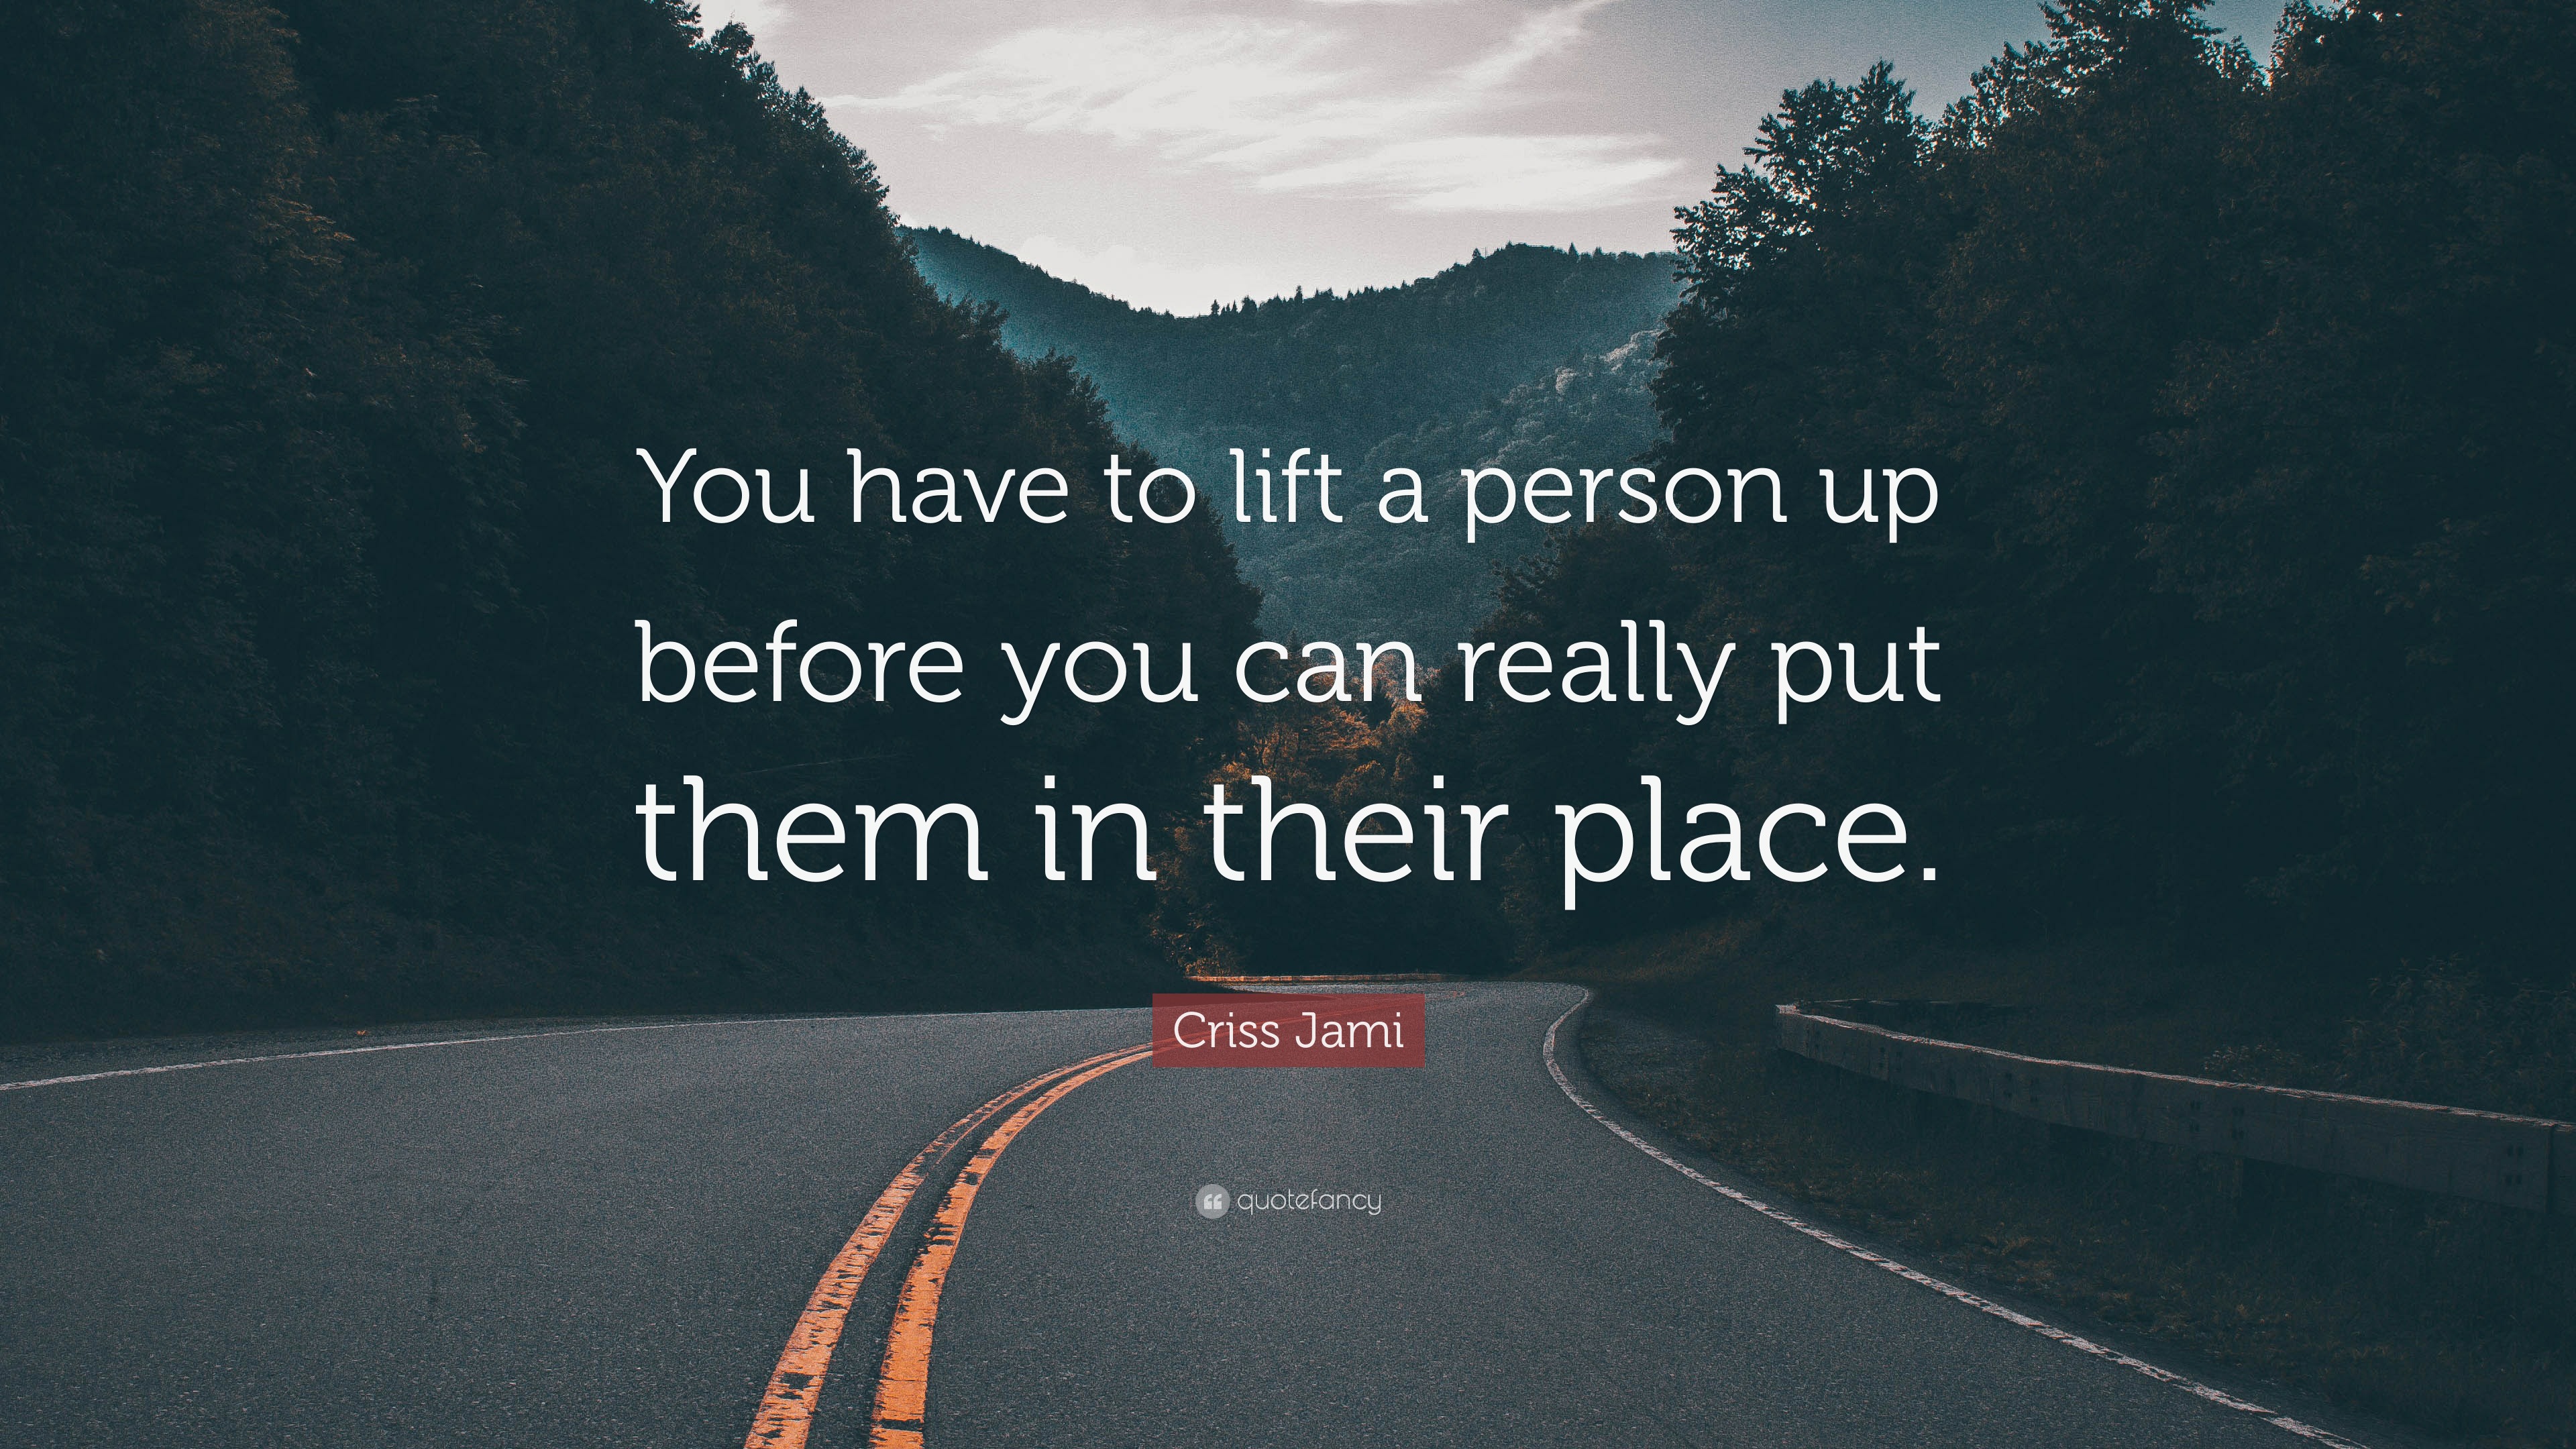 Criss Jami Quote: “You Have To Lift A Person Up Before You Can Really Put Them